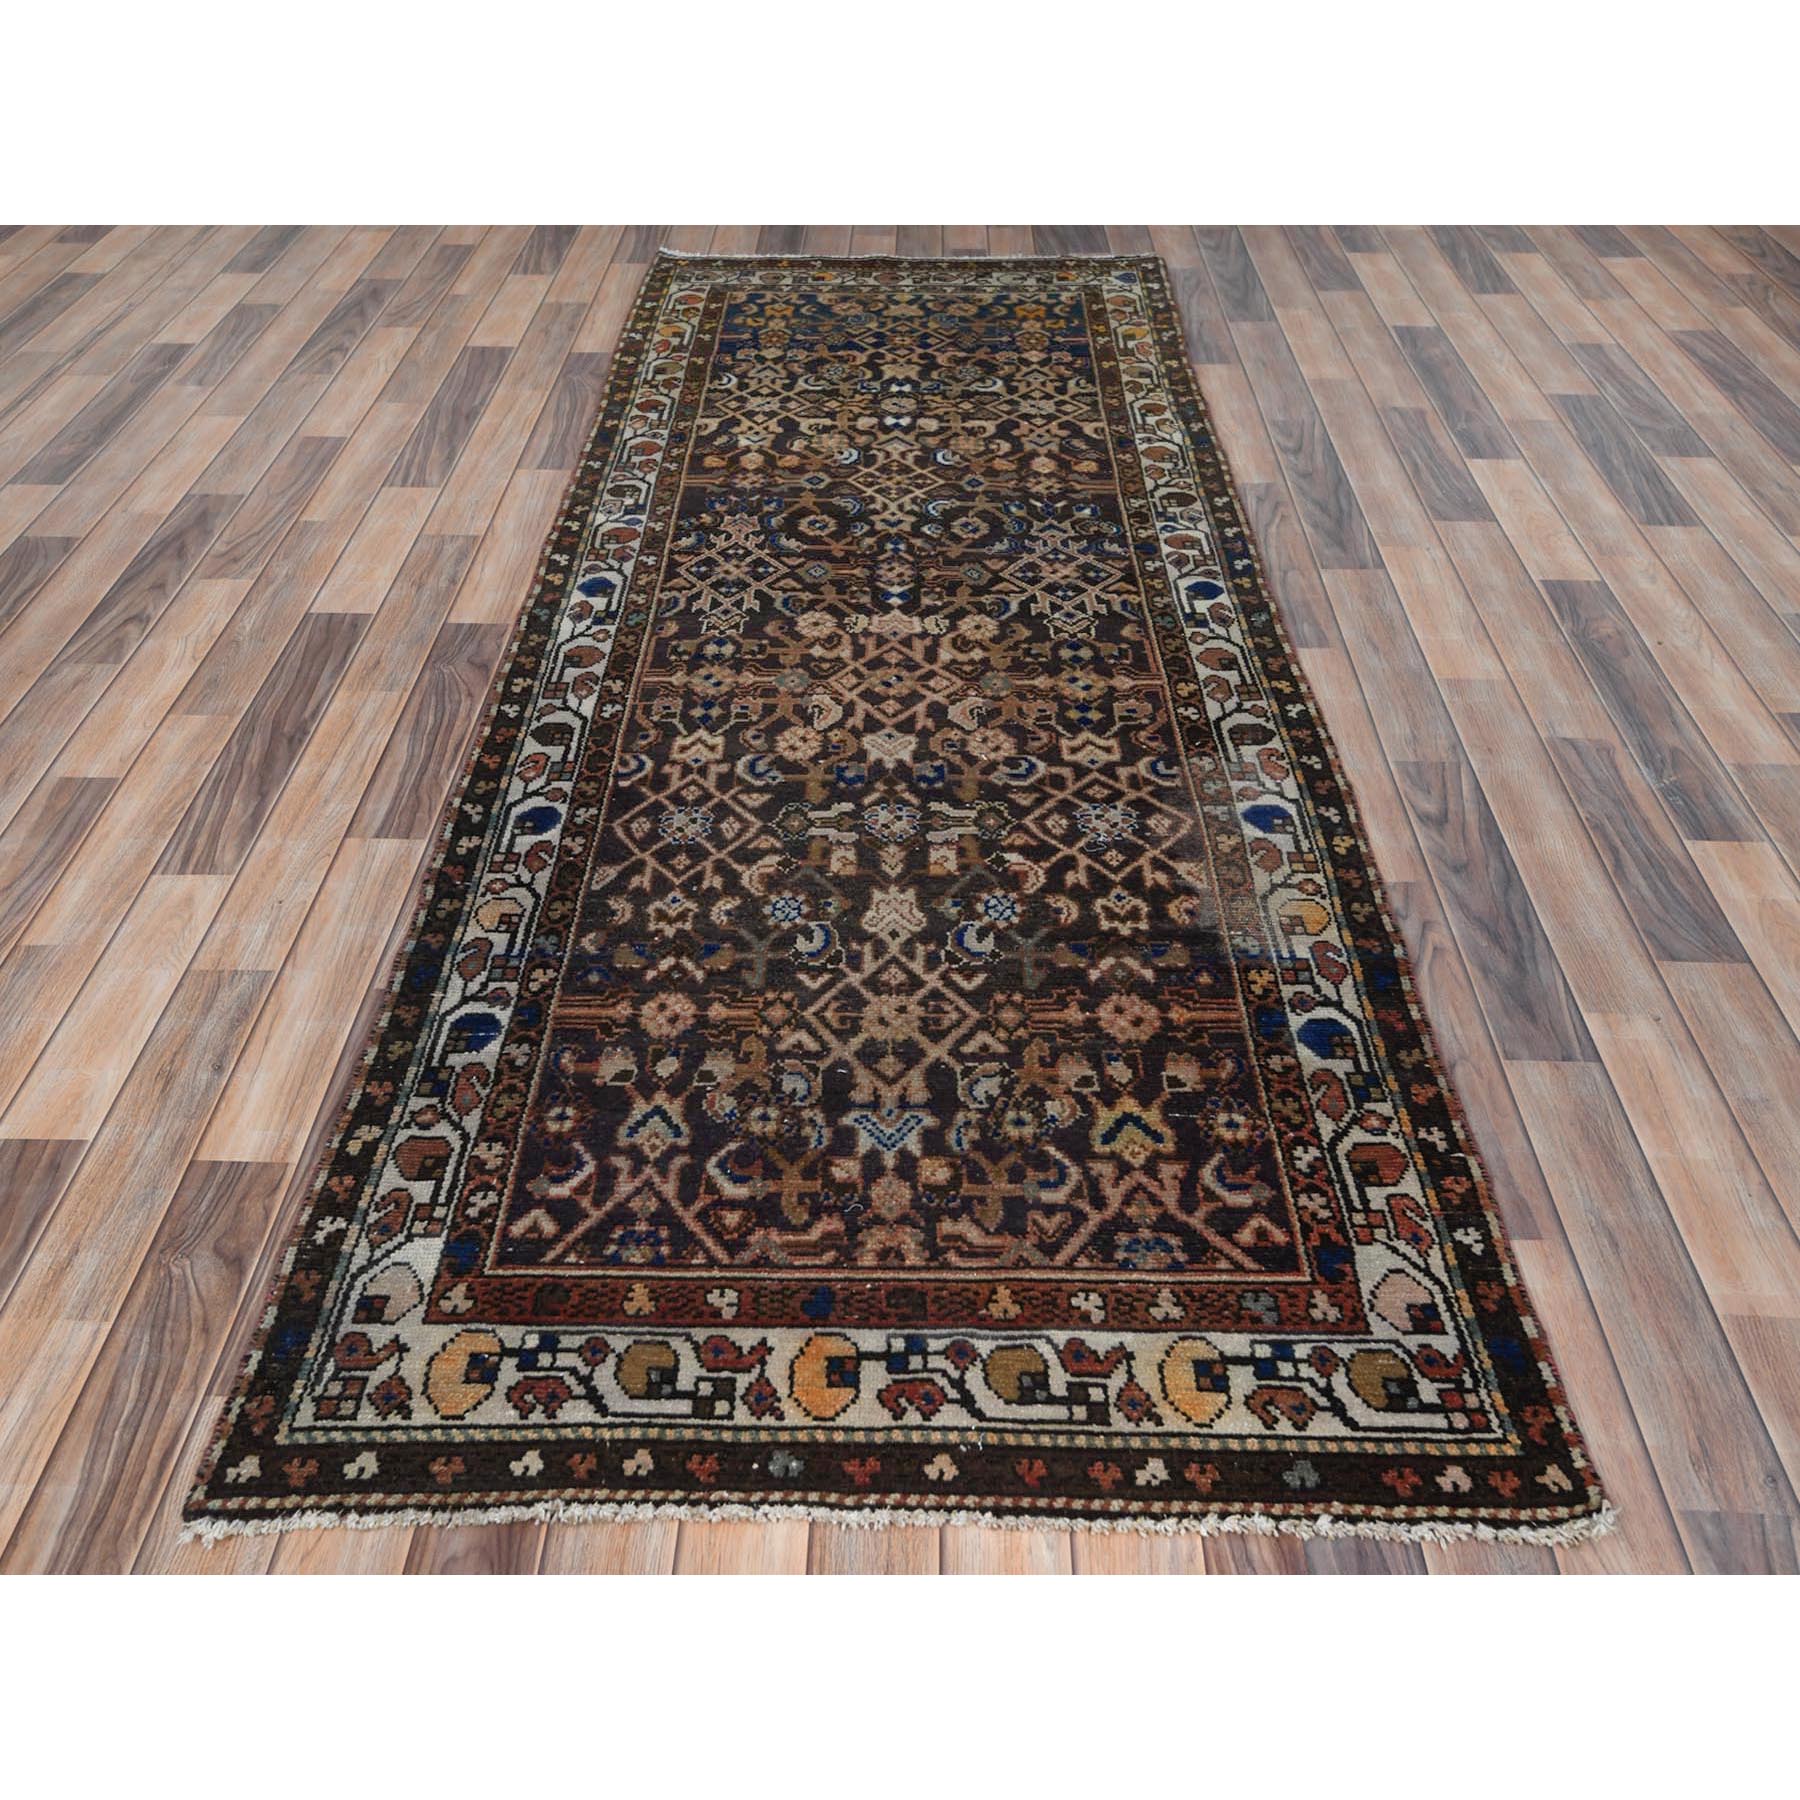 3'5"x9'2" Chocolate Brown Vintage Persian Hamadan with Fish Mahi All Over Design, Abrash, Hand Woven Pure Wool, Distressed Look, Worn Down Wide Runner Oriental Rug 